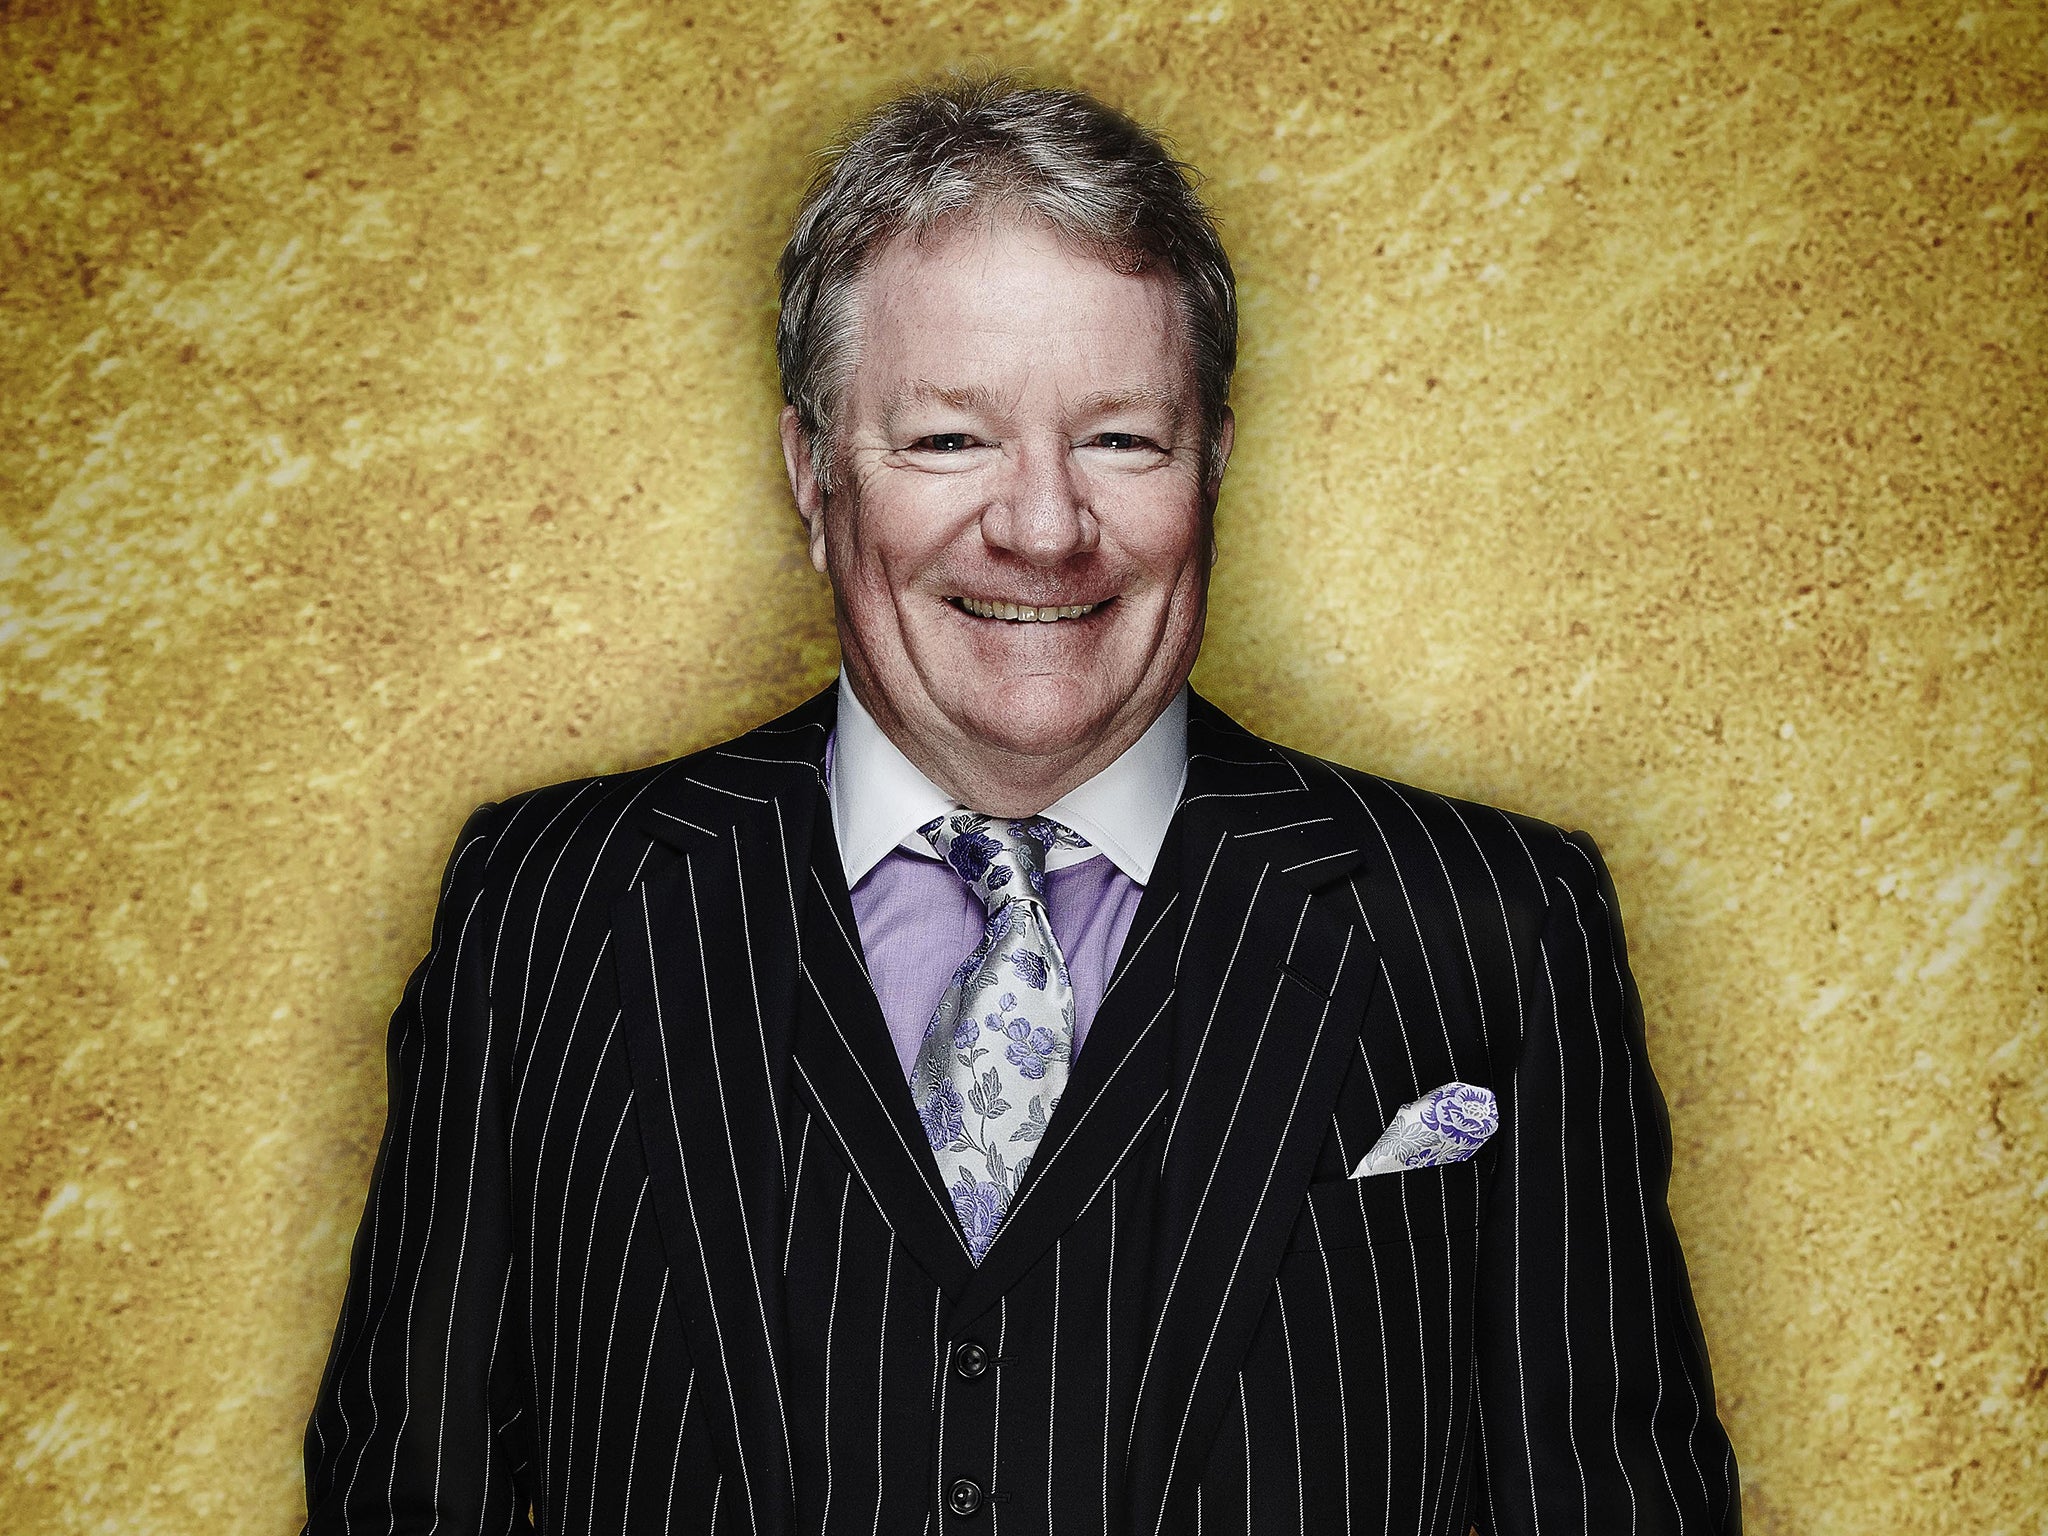 Jim Davidson was awarded an OBE in 2001 for charity work